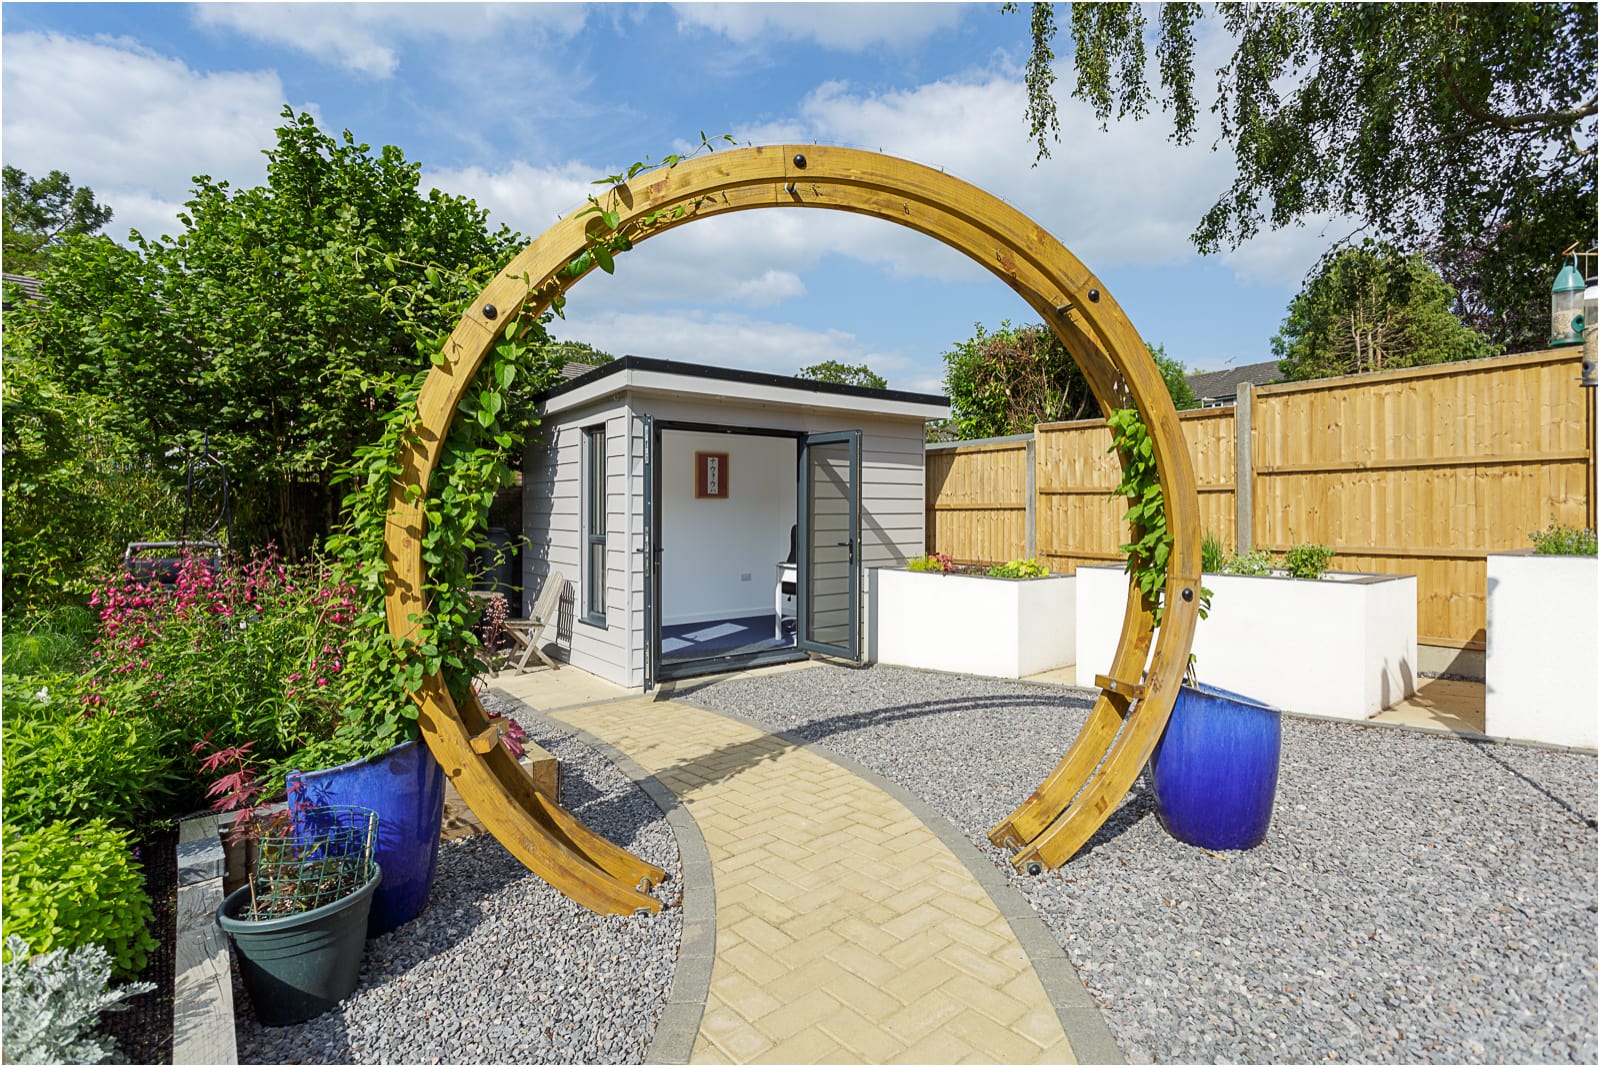 residential property moongate archway with flowers leading to garden office room